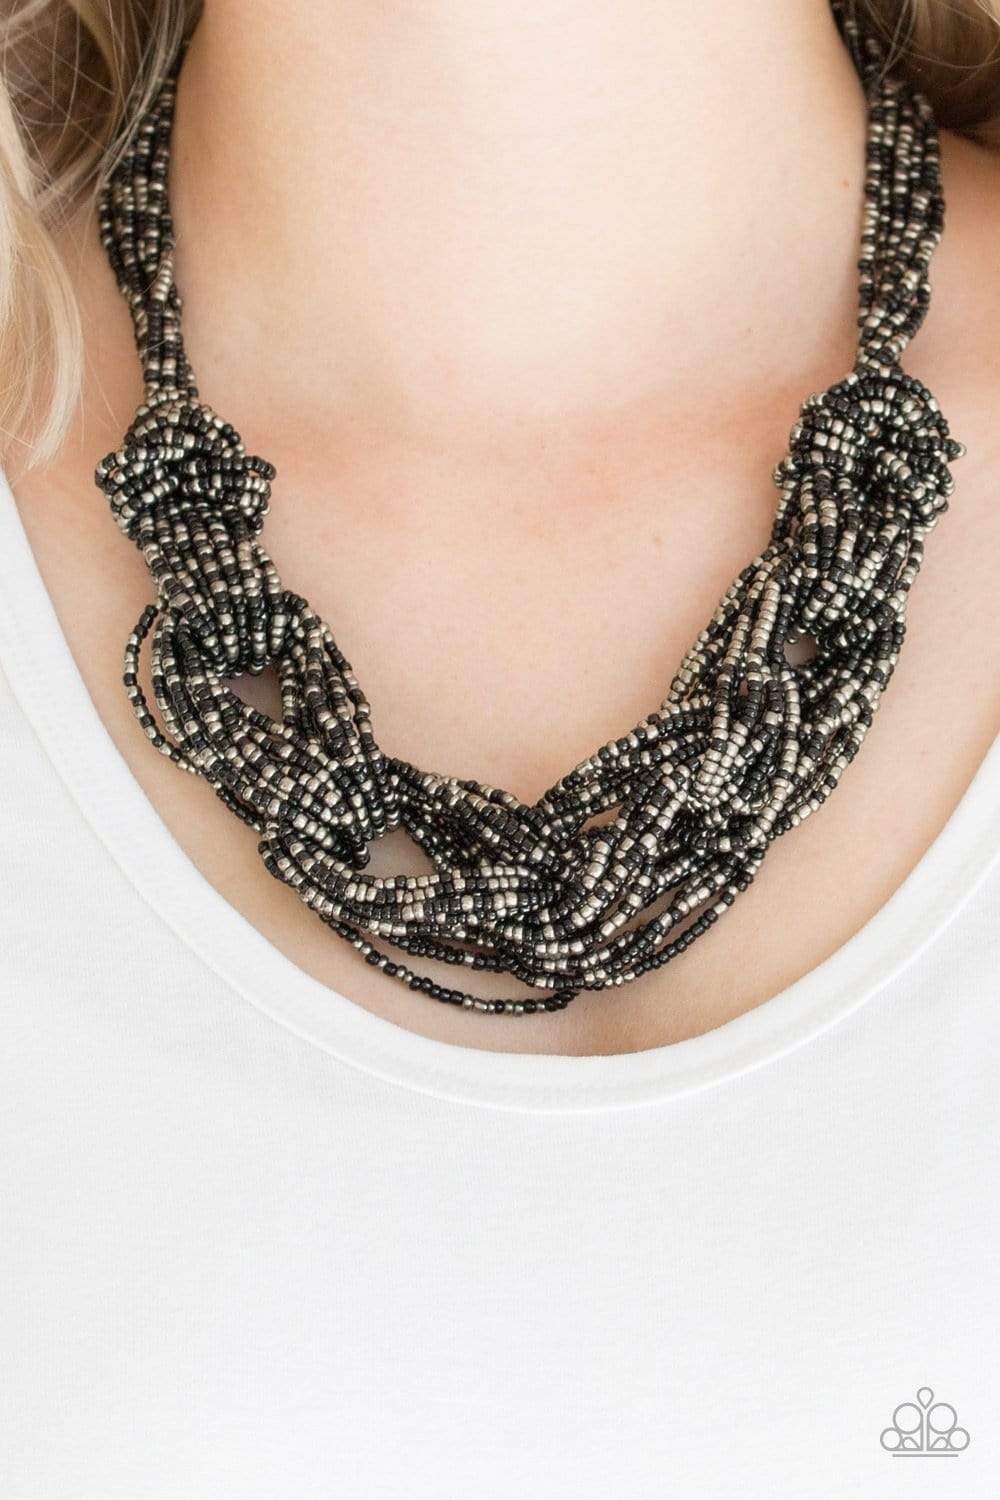 City Catwalk - Black/Silver seed bead necklace